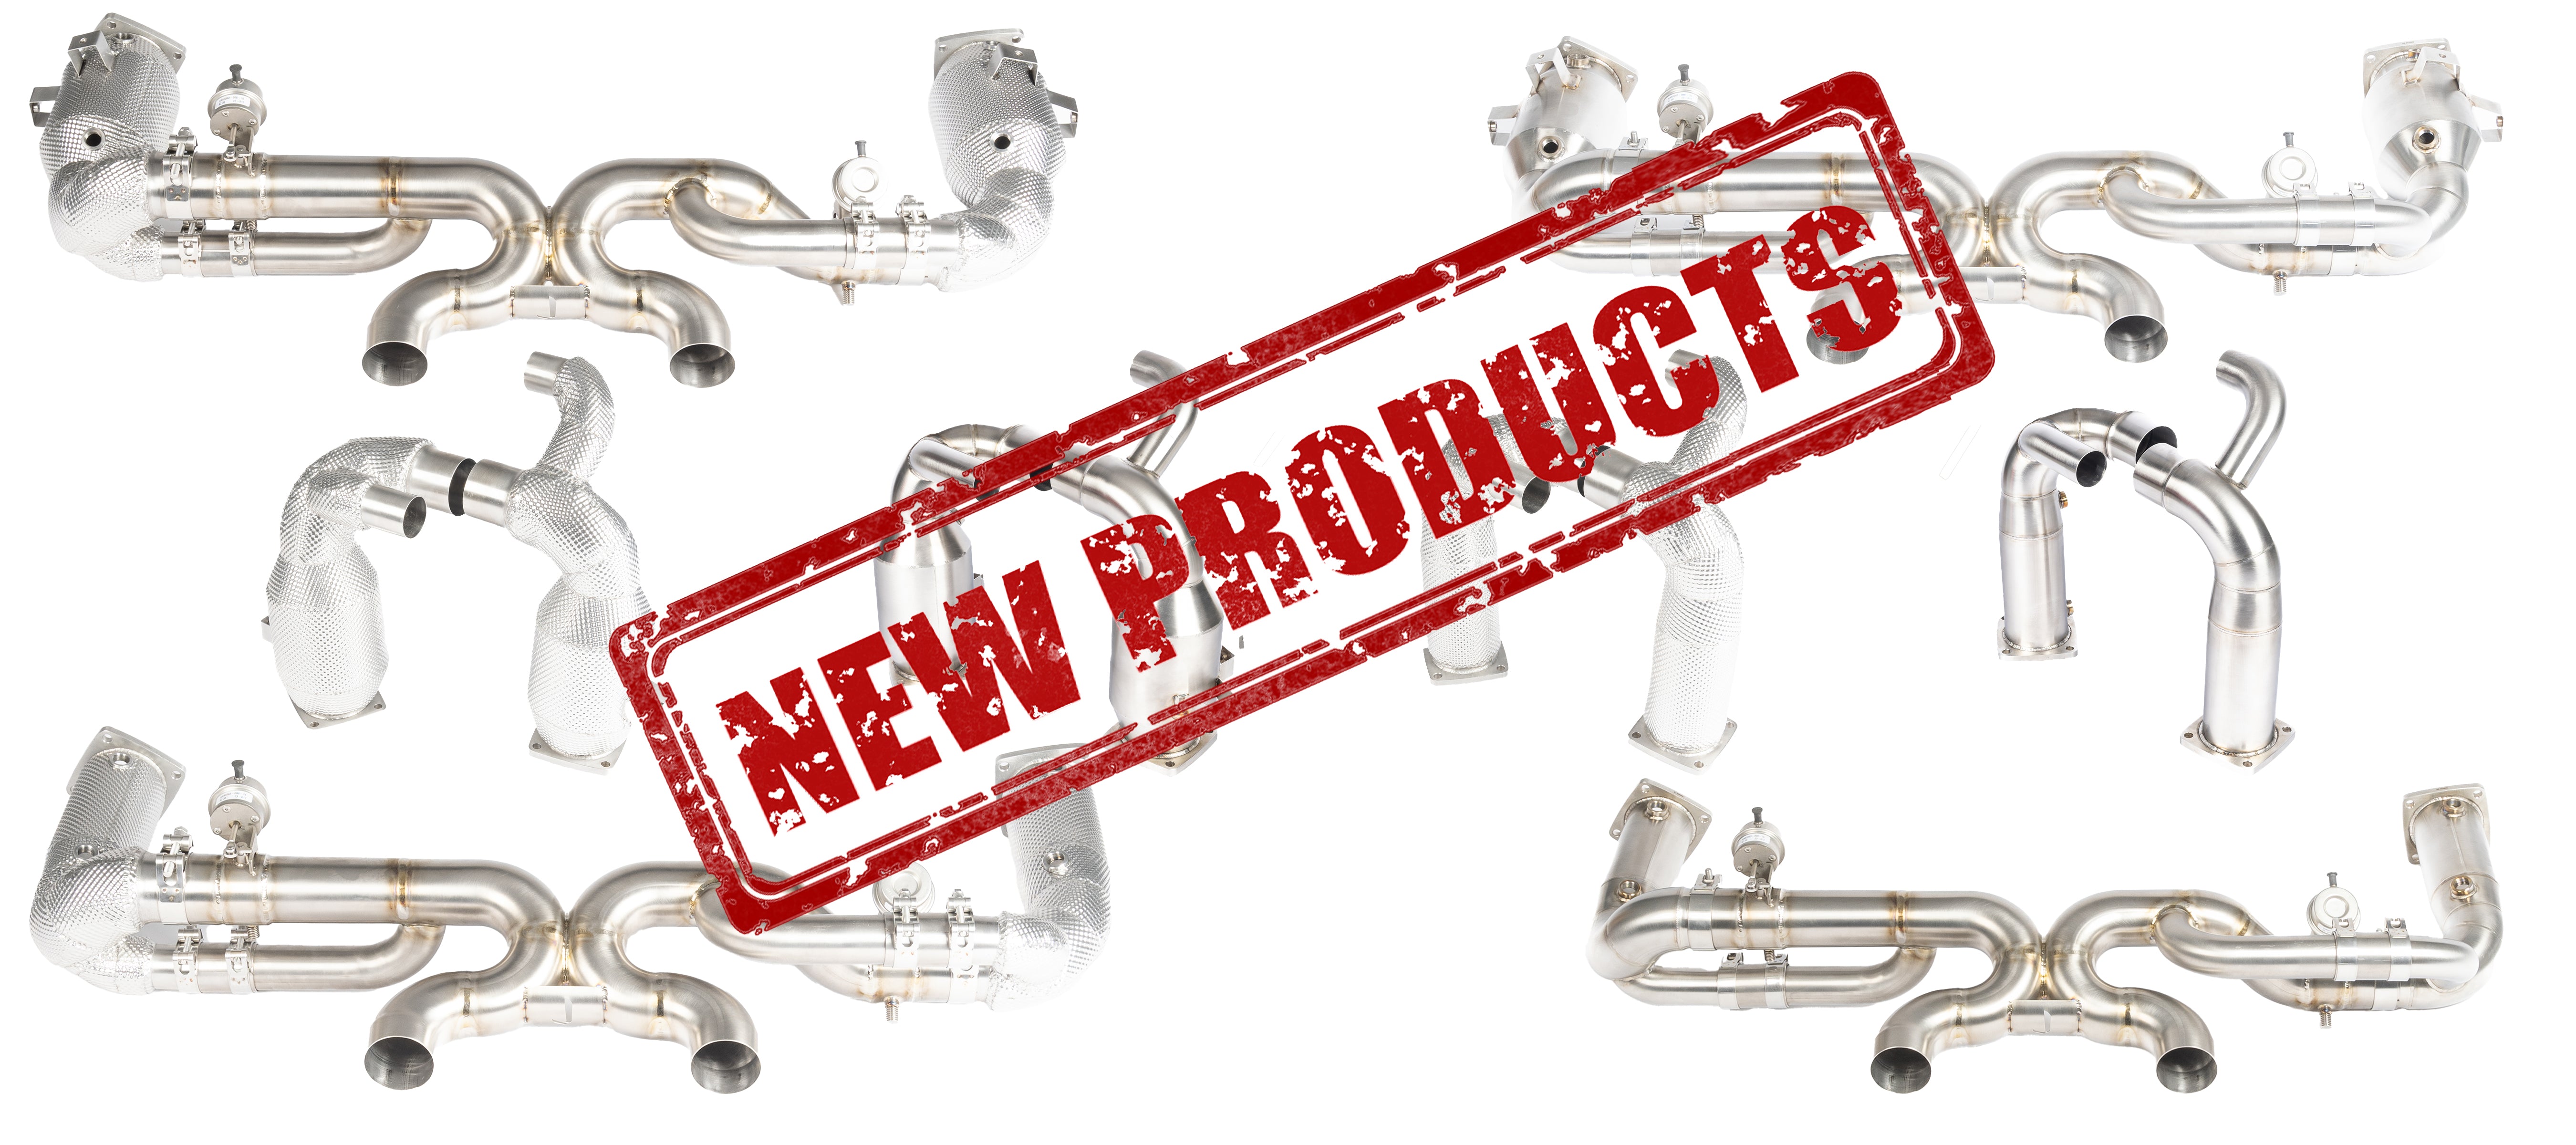 NEW PRODUCTS - 991.2 CARRERA (INCONEL CAT REPLACEMENTS & TITANIUM VALVED RACE PIPES)